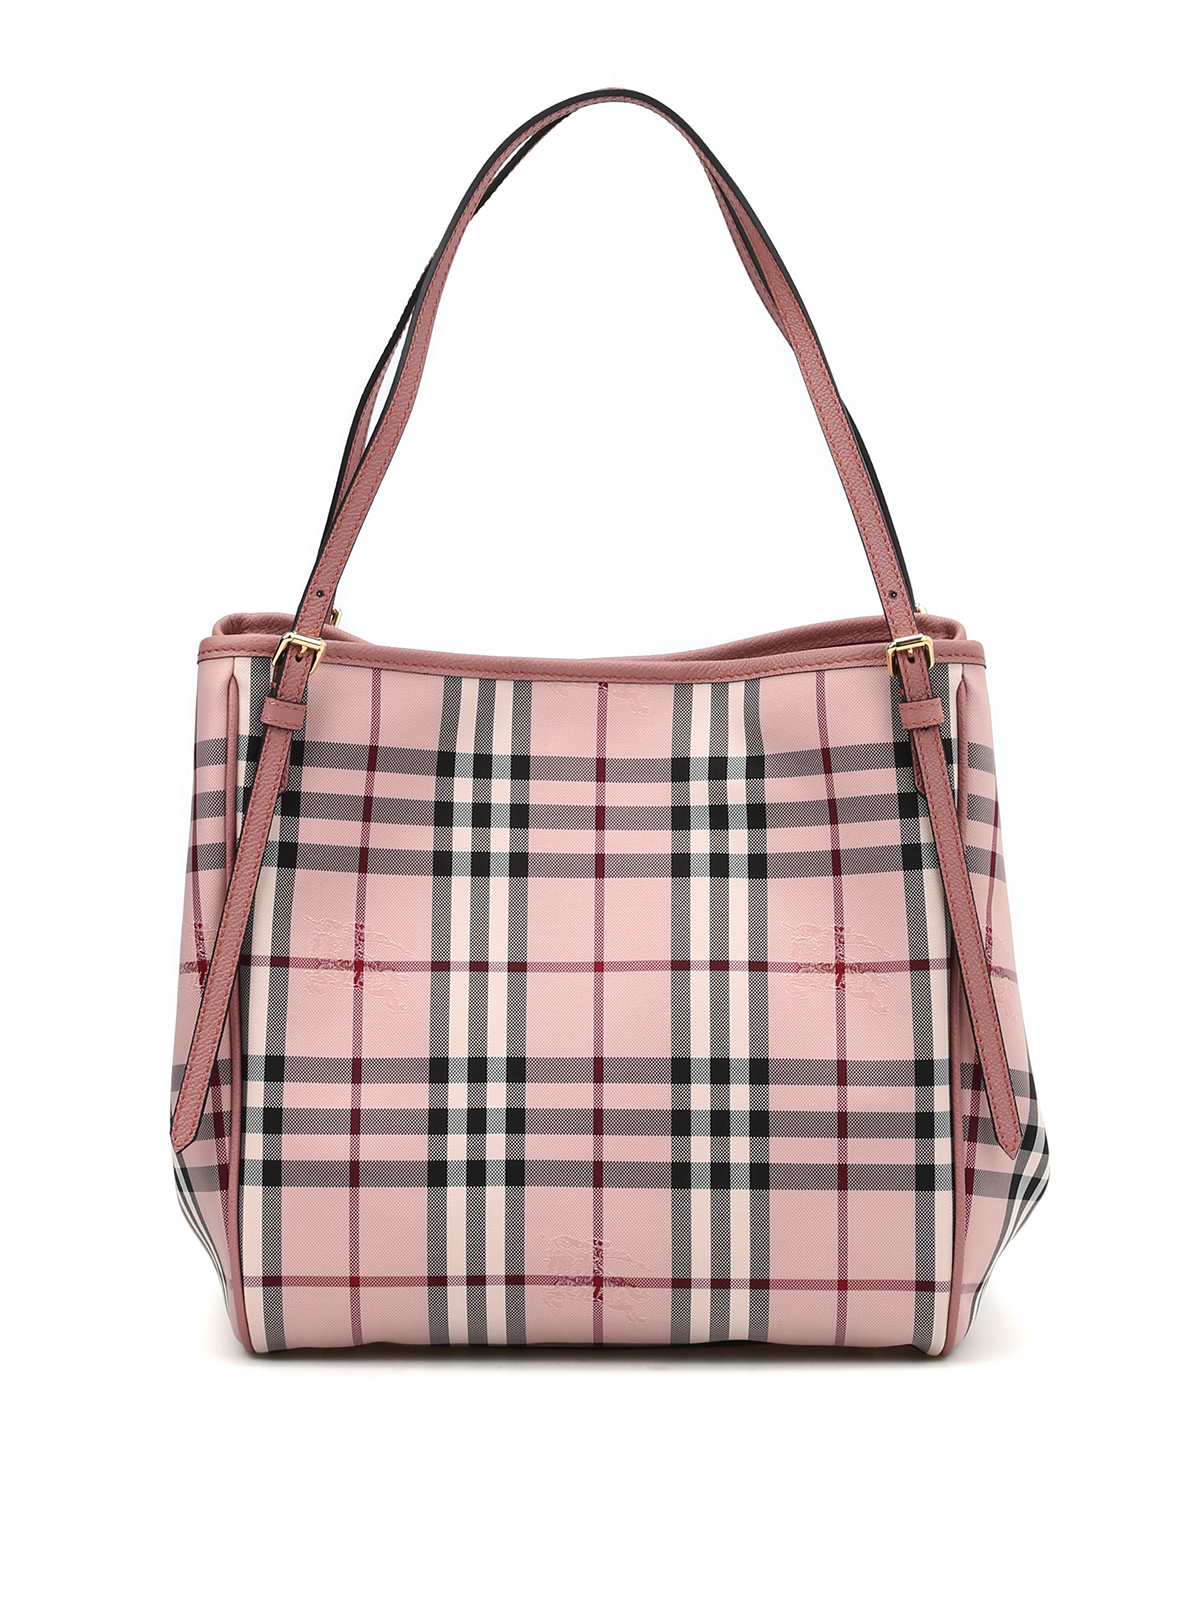 Burberry - The Canter small tote - totes bags - 4033954